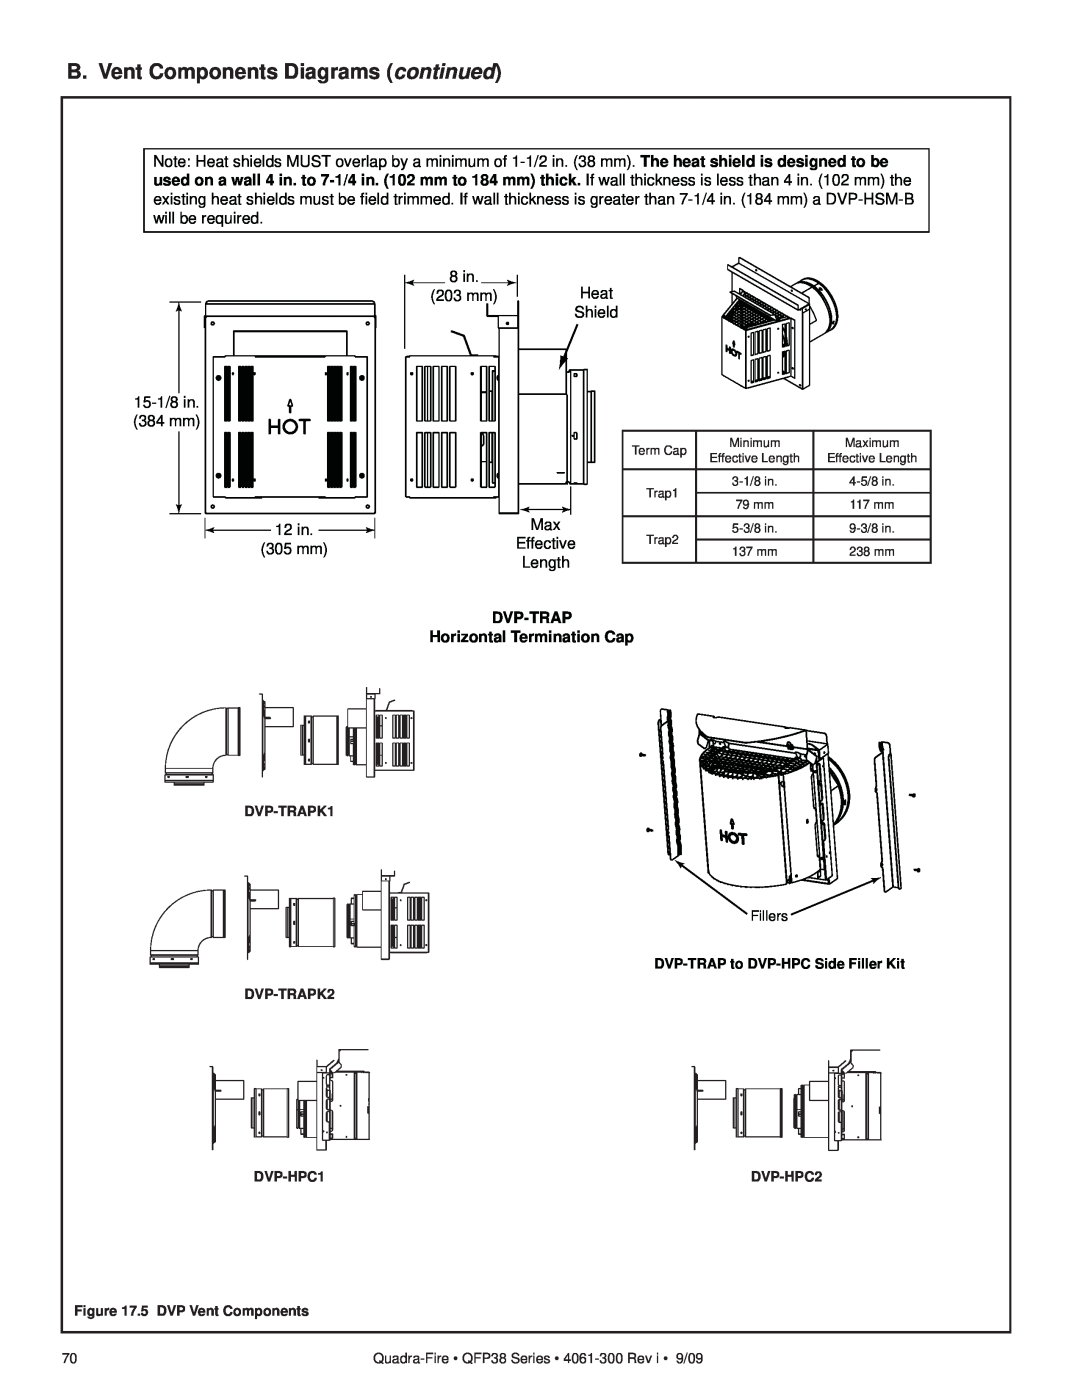 Quadra-Fire QFP38-NG B. Vent Components Diagrams continued, 15-1/8 in 384 mm 12 in. 305 mm, 8 in 203 mm Heat Shield 